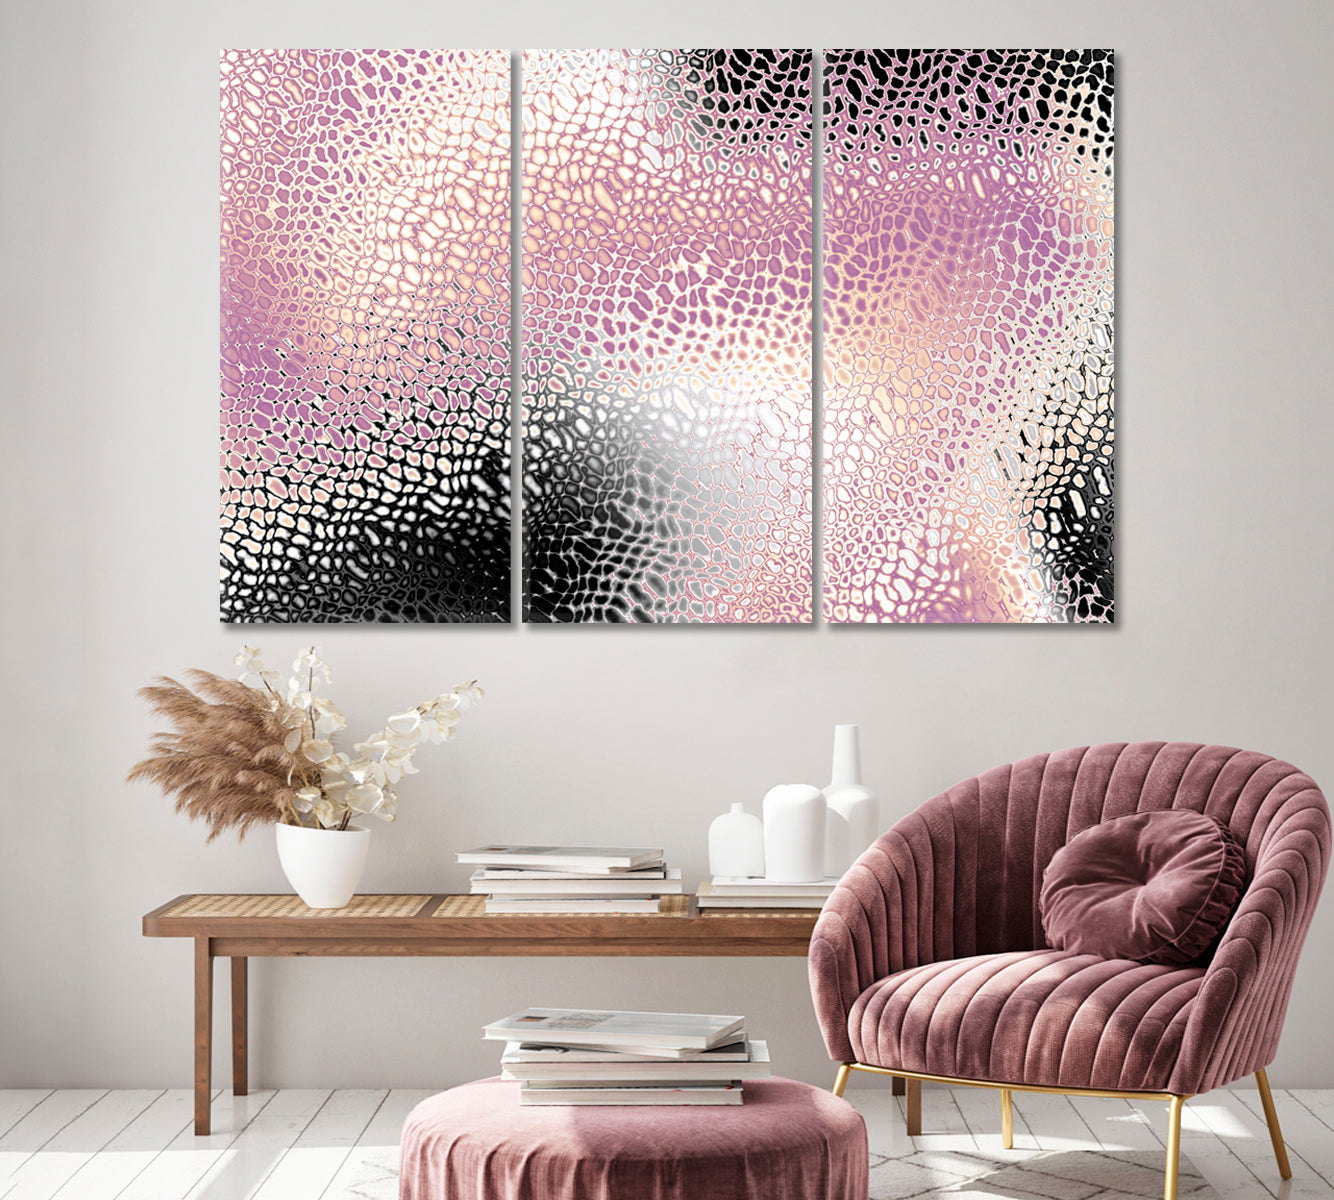 Creative Snake Skin Pattern Canvas Print ArtLexy 3 Panels 36"x24" inches 